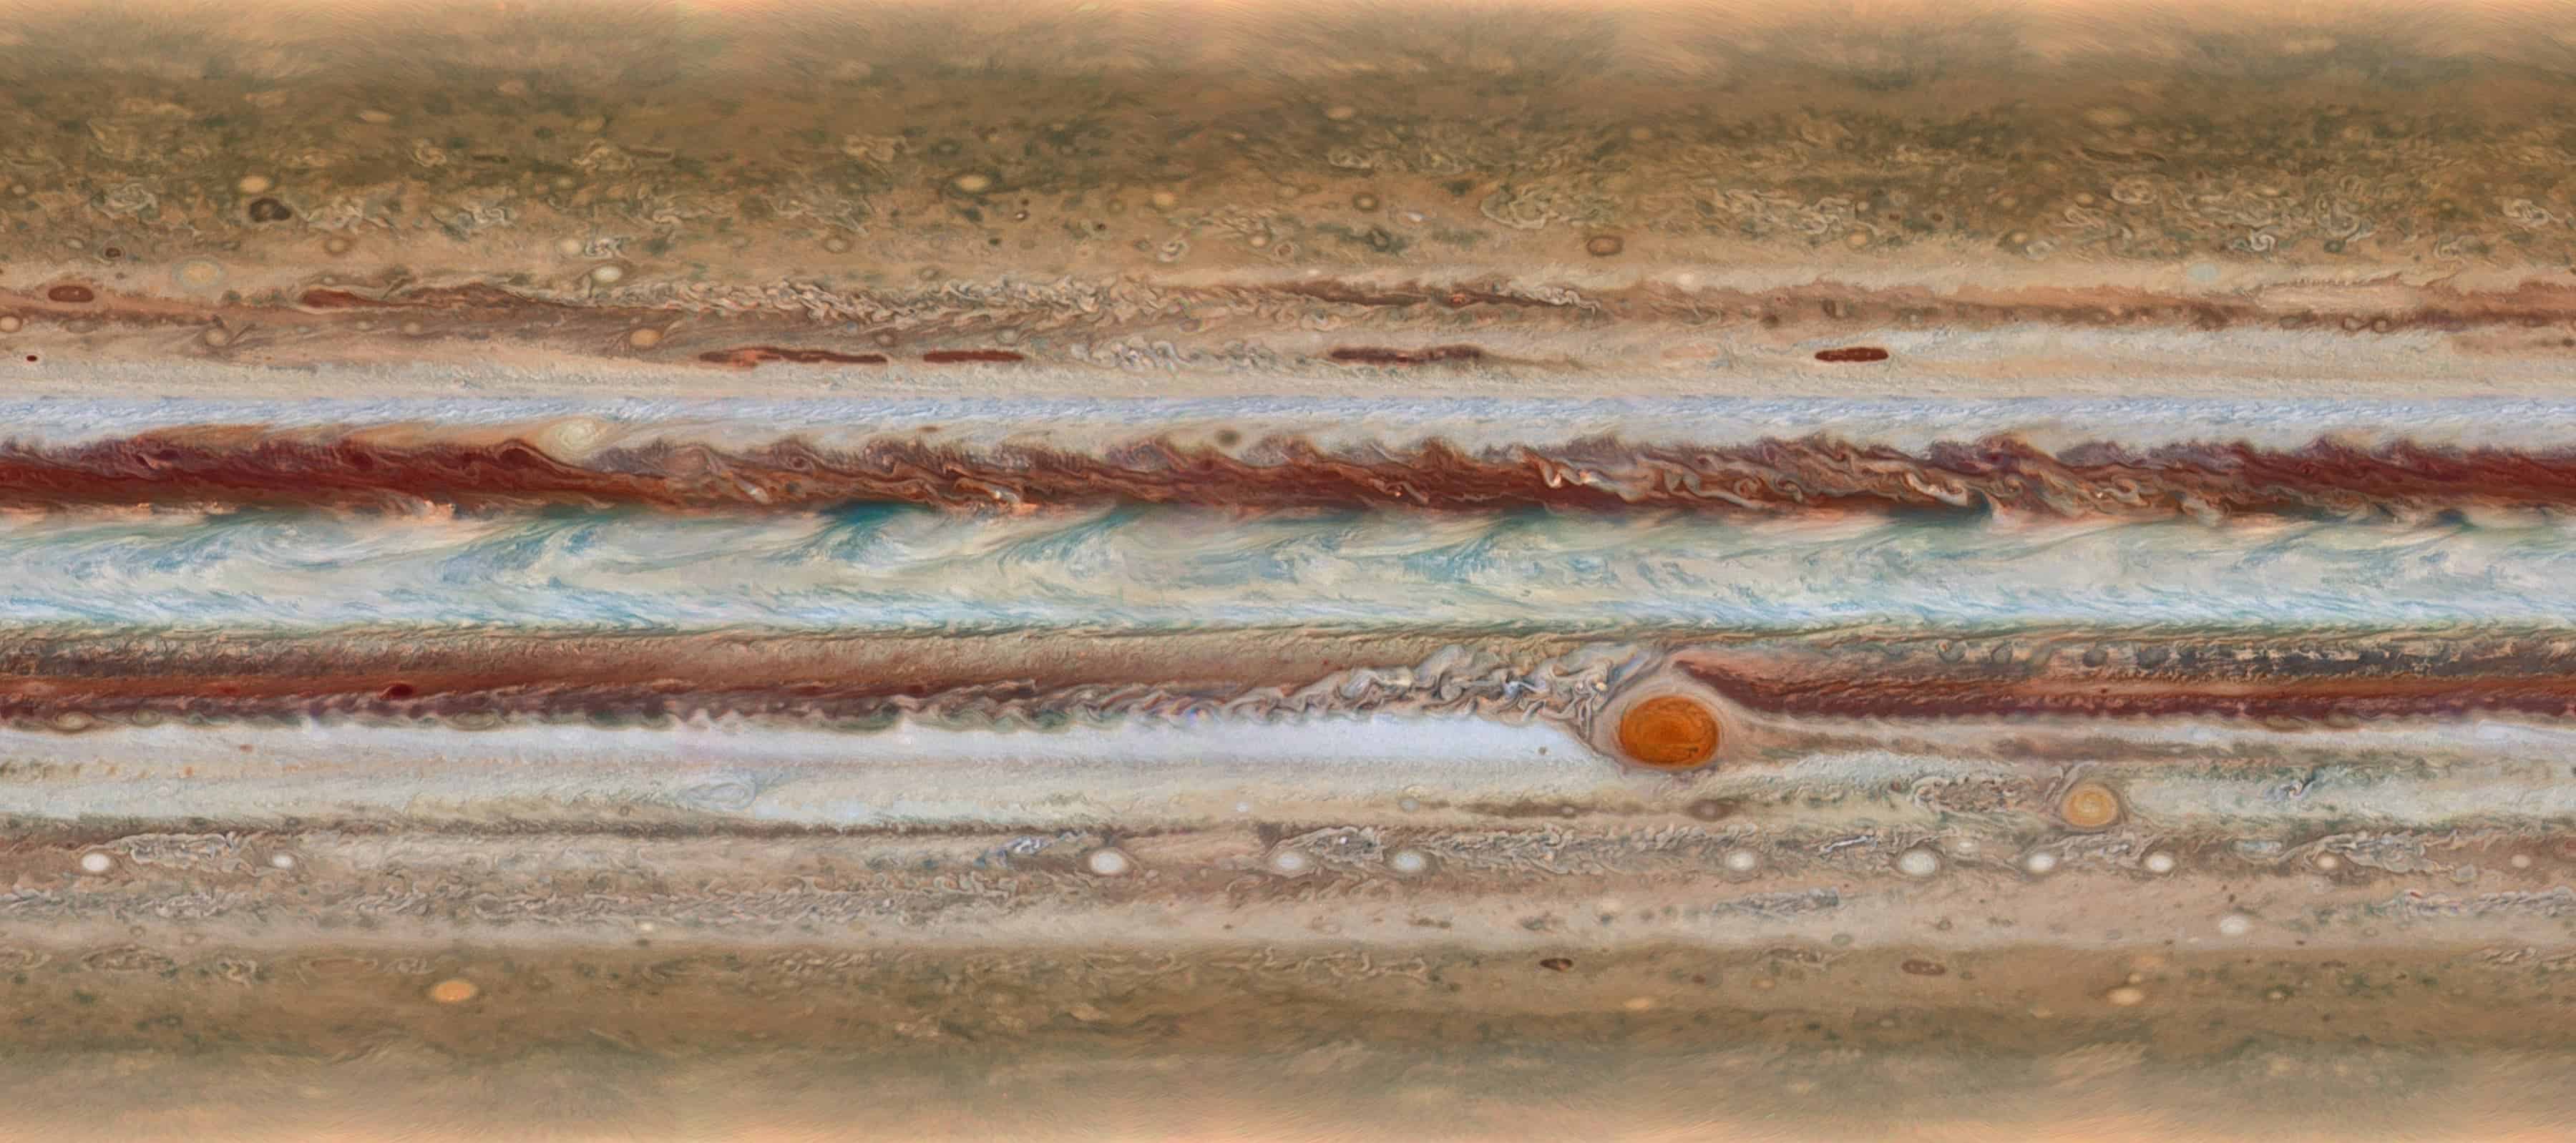 Jupiter's winds are tightly connected to the planet's gravitational and magnetic fields. Image credits: NASA / ESA / UC Berkeley.